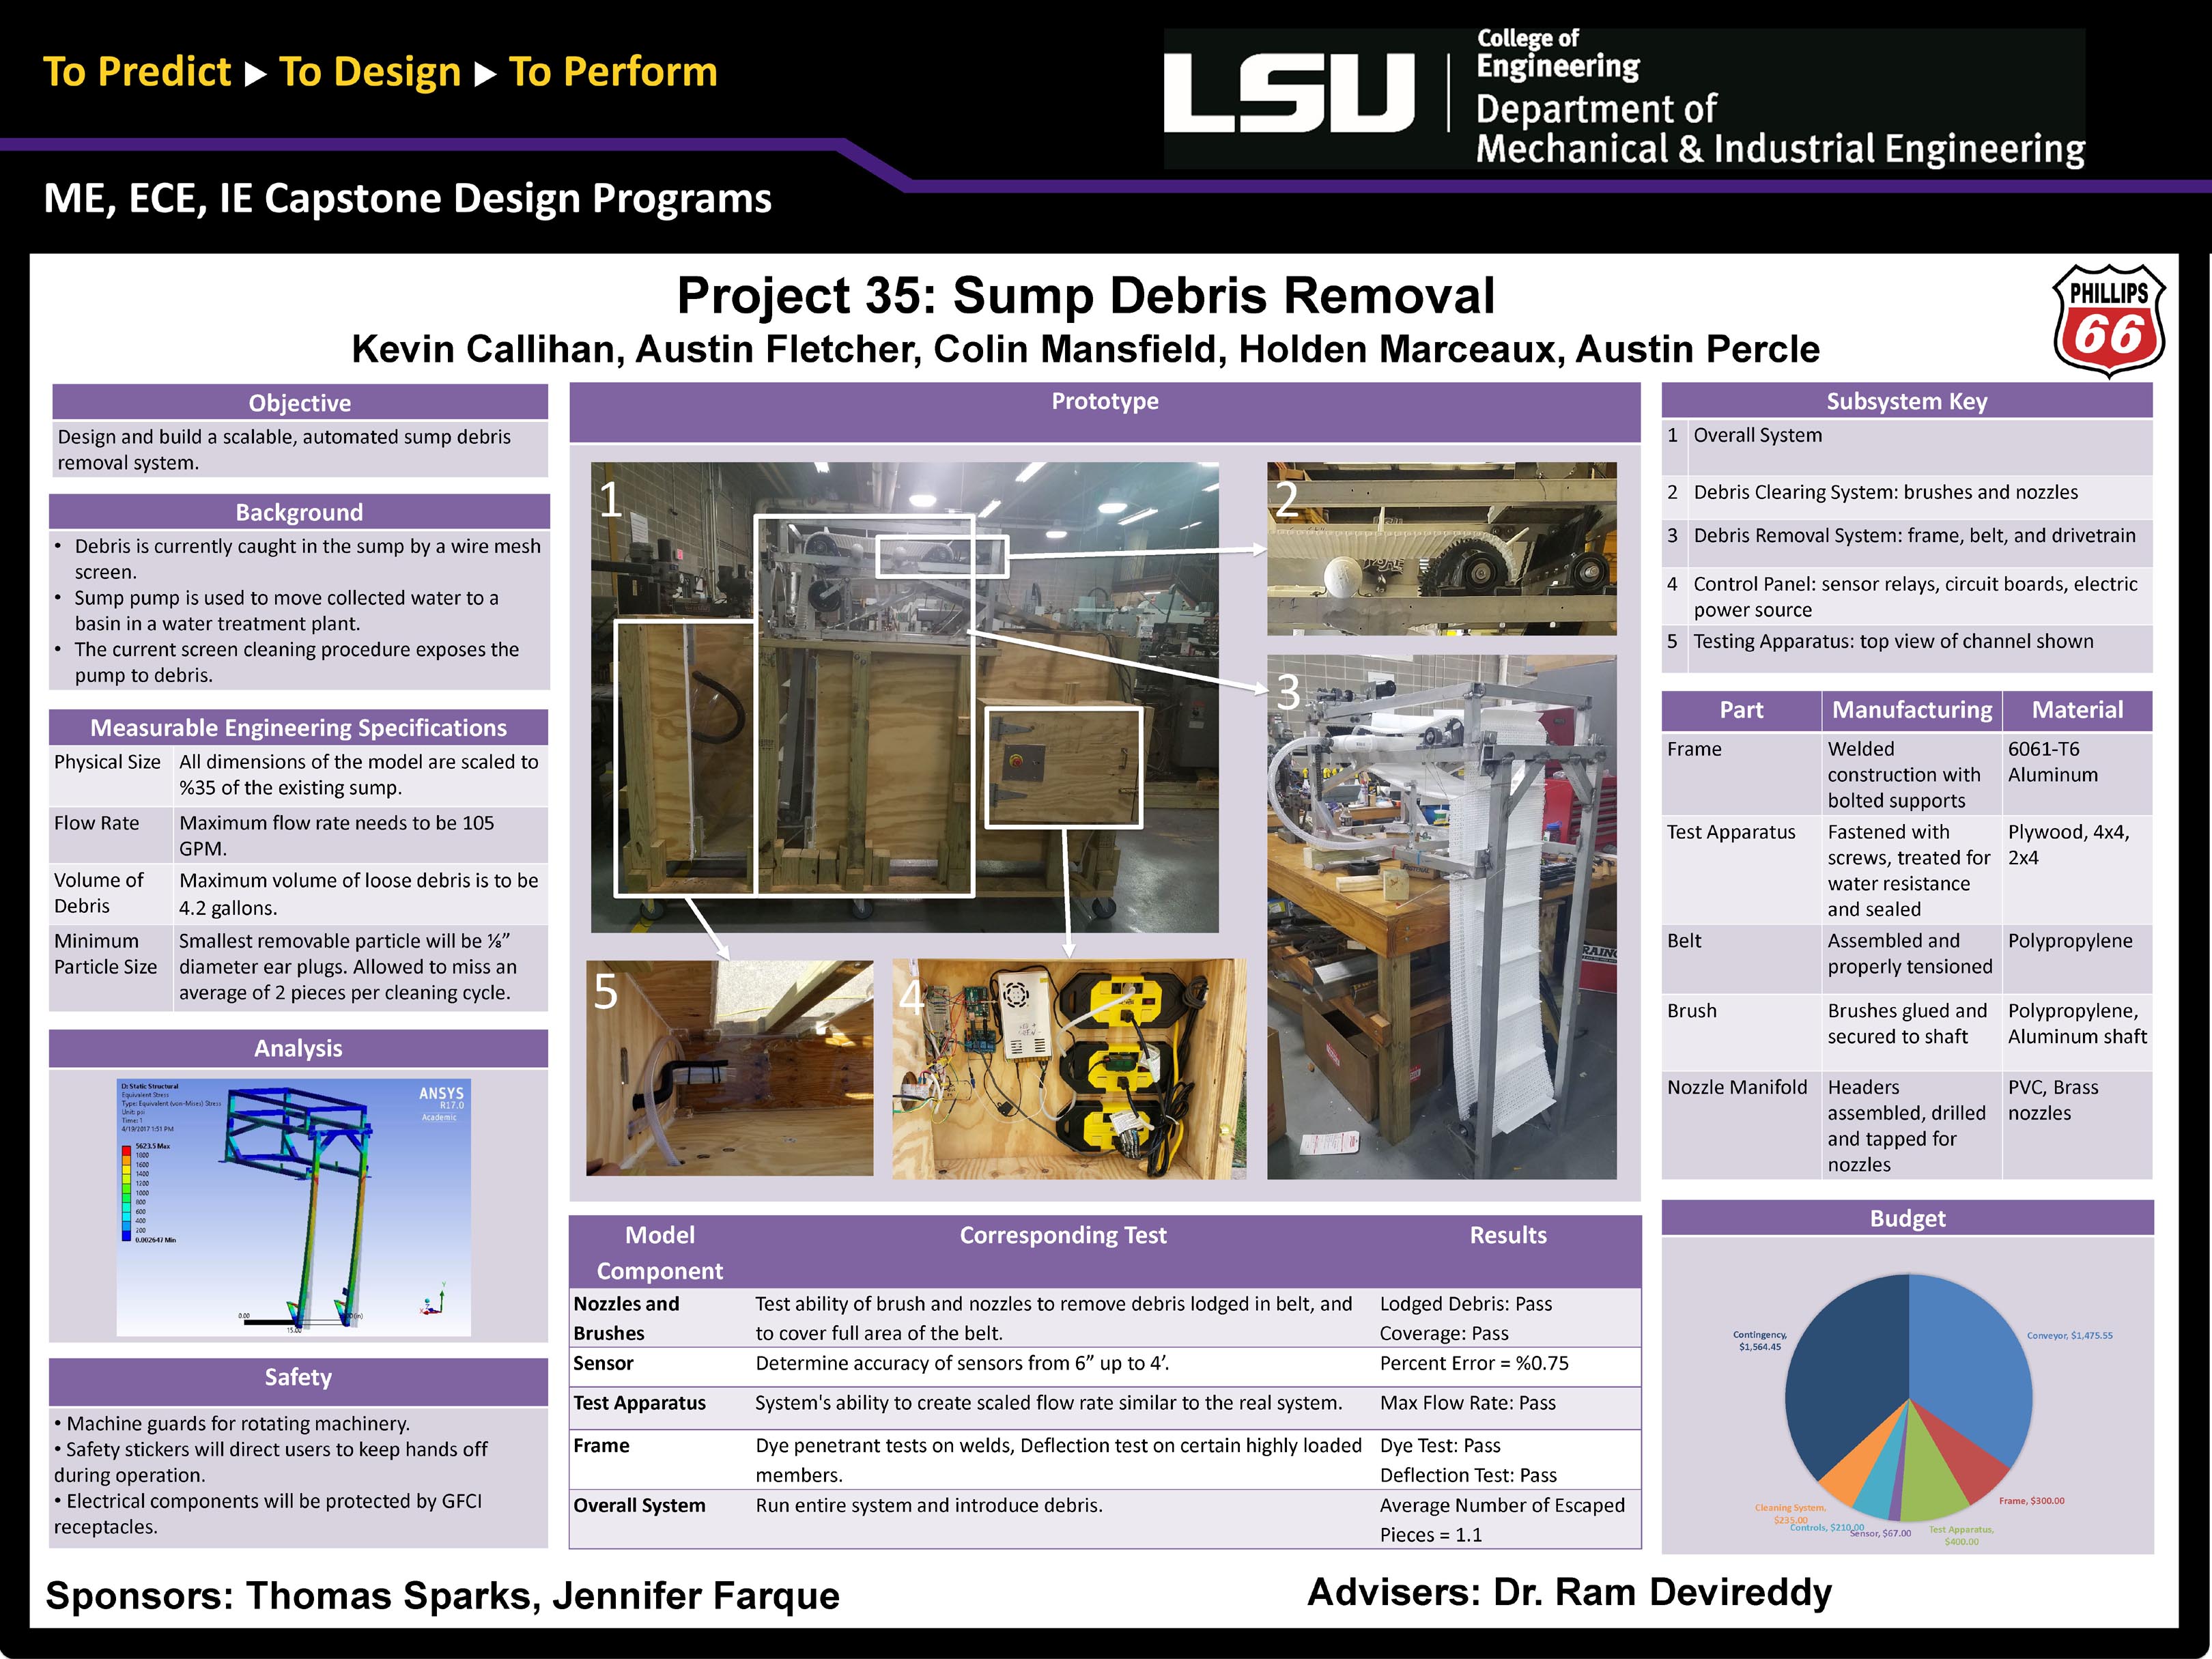 Project 35: Sump Debris Removal System